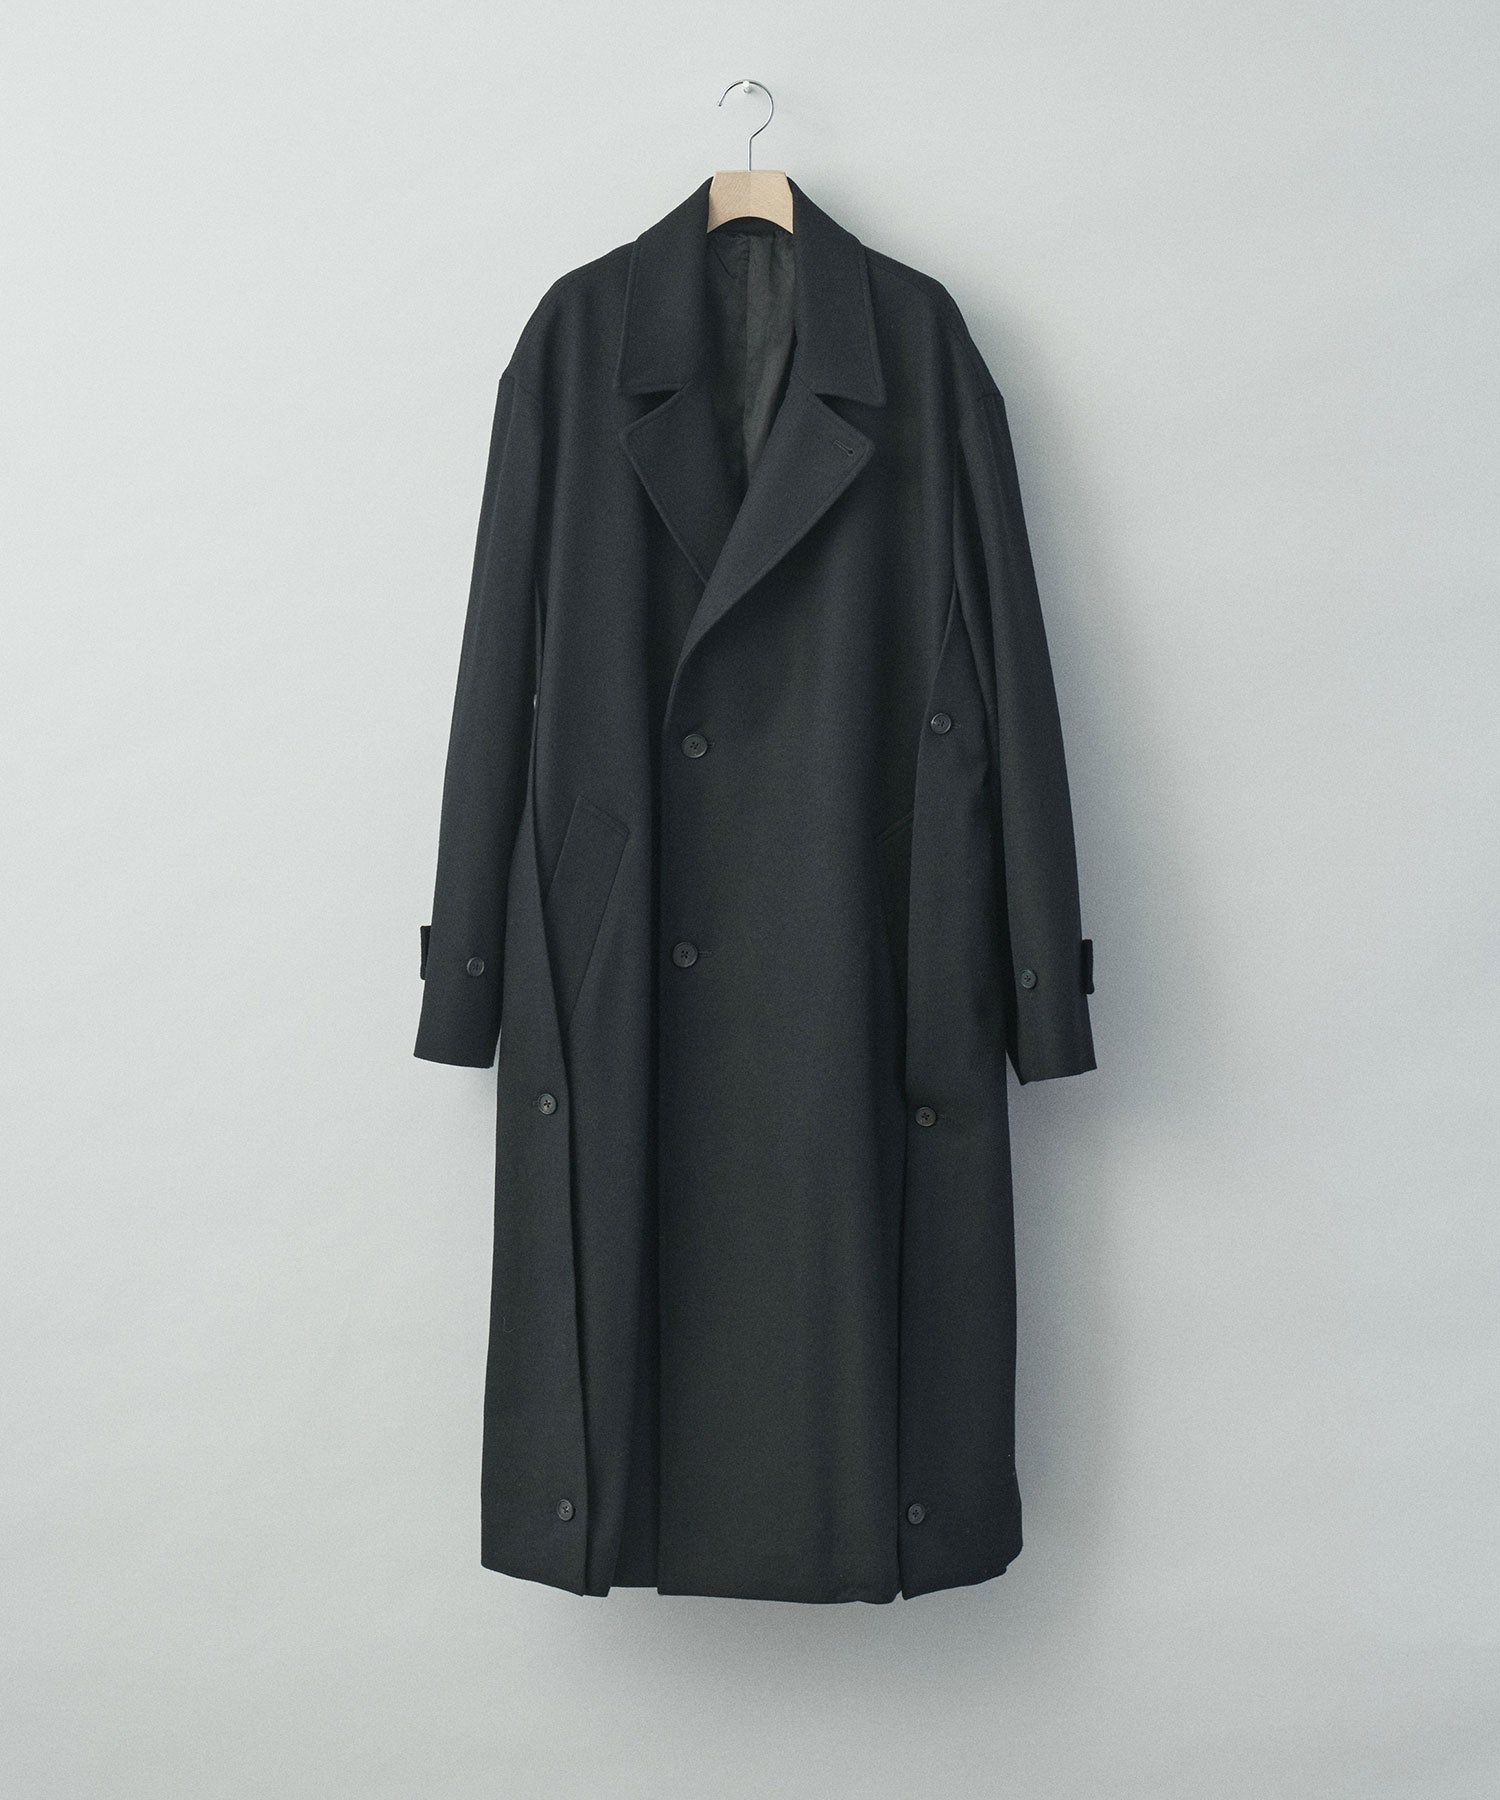 stein】OVERSIZED LAYERED SINGLE COAT 公式通販サイト session(セッション)